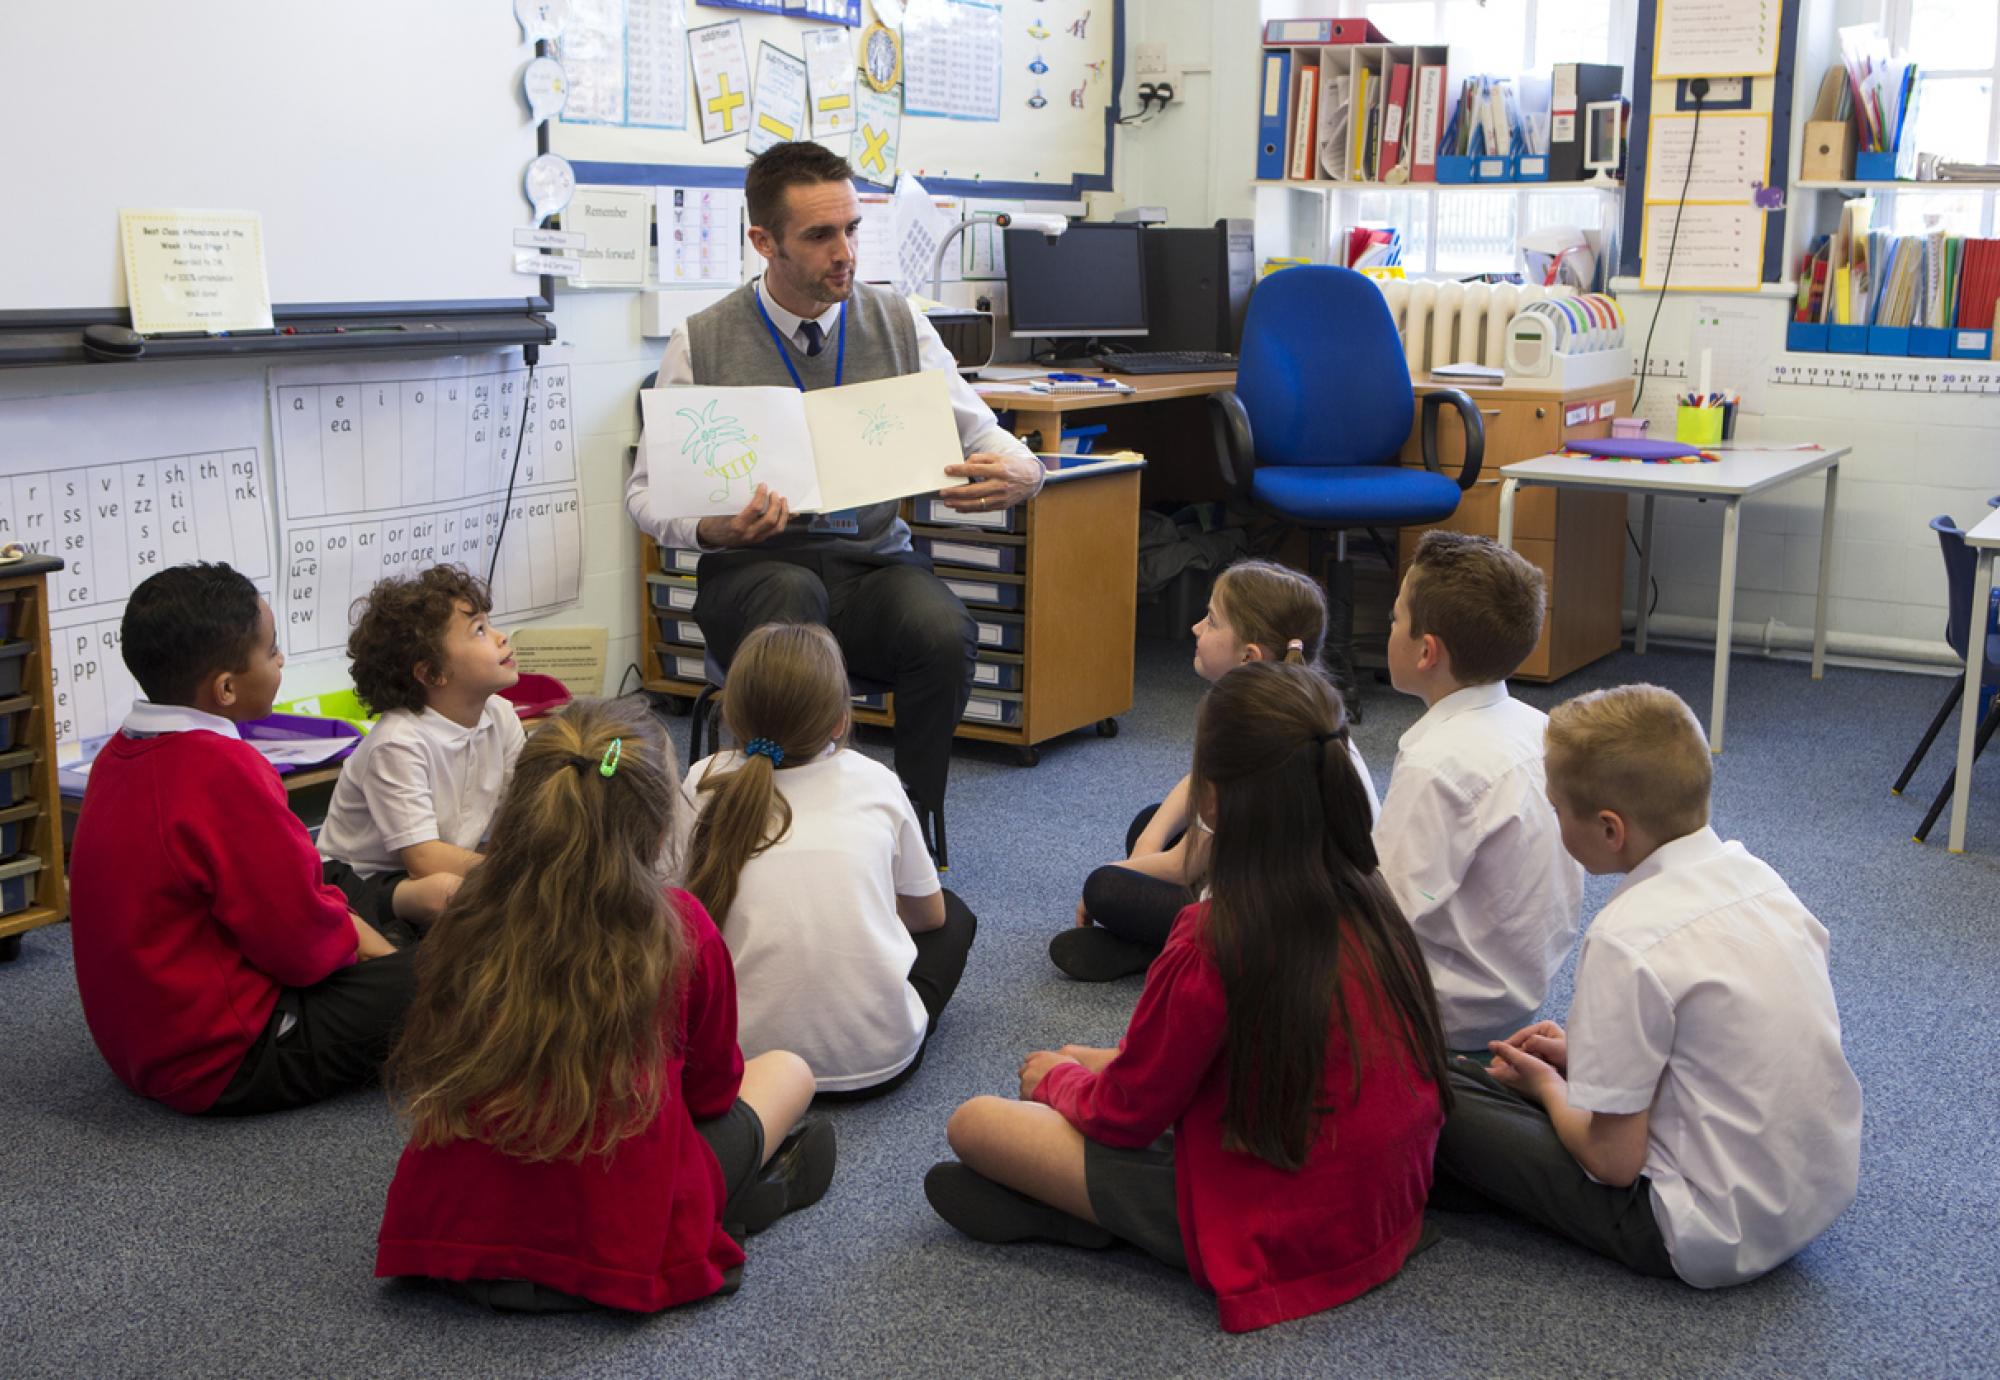 Children sit with teacher as he reads a story.